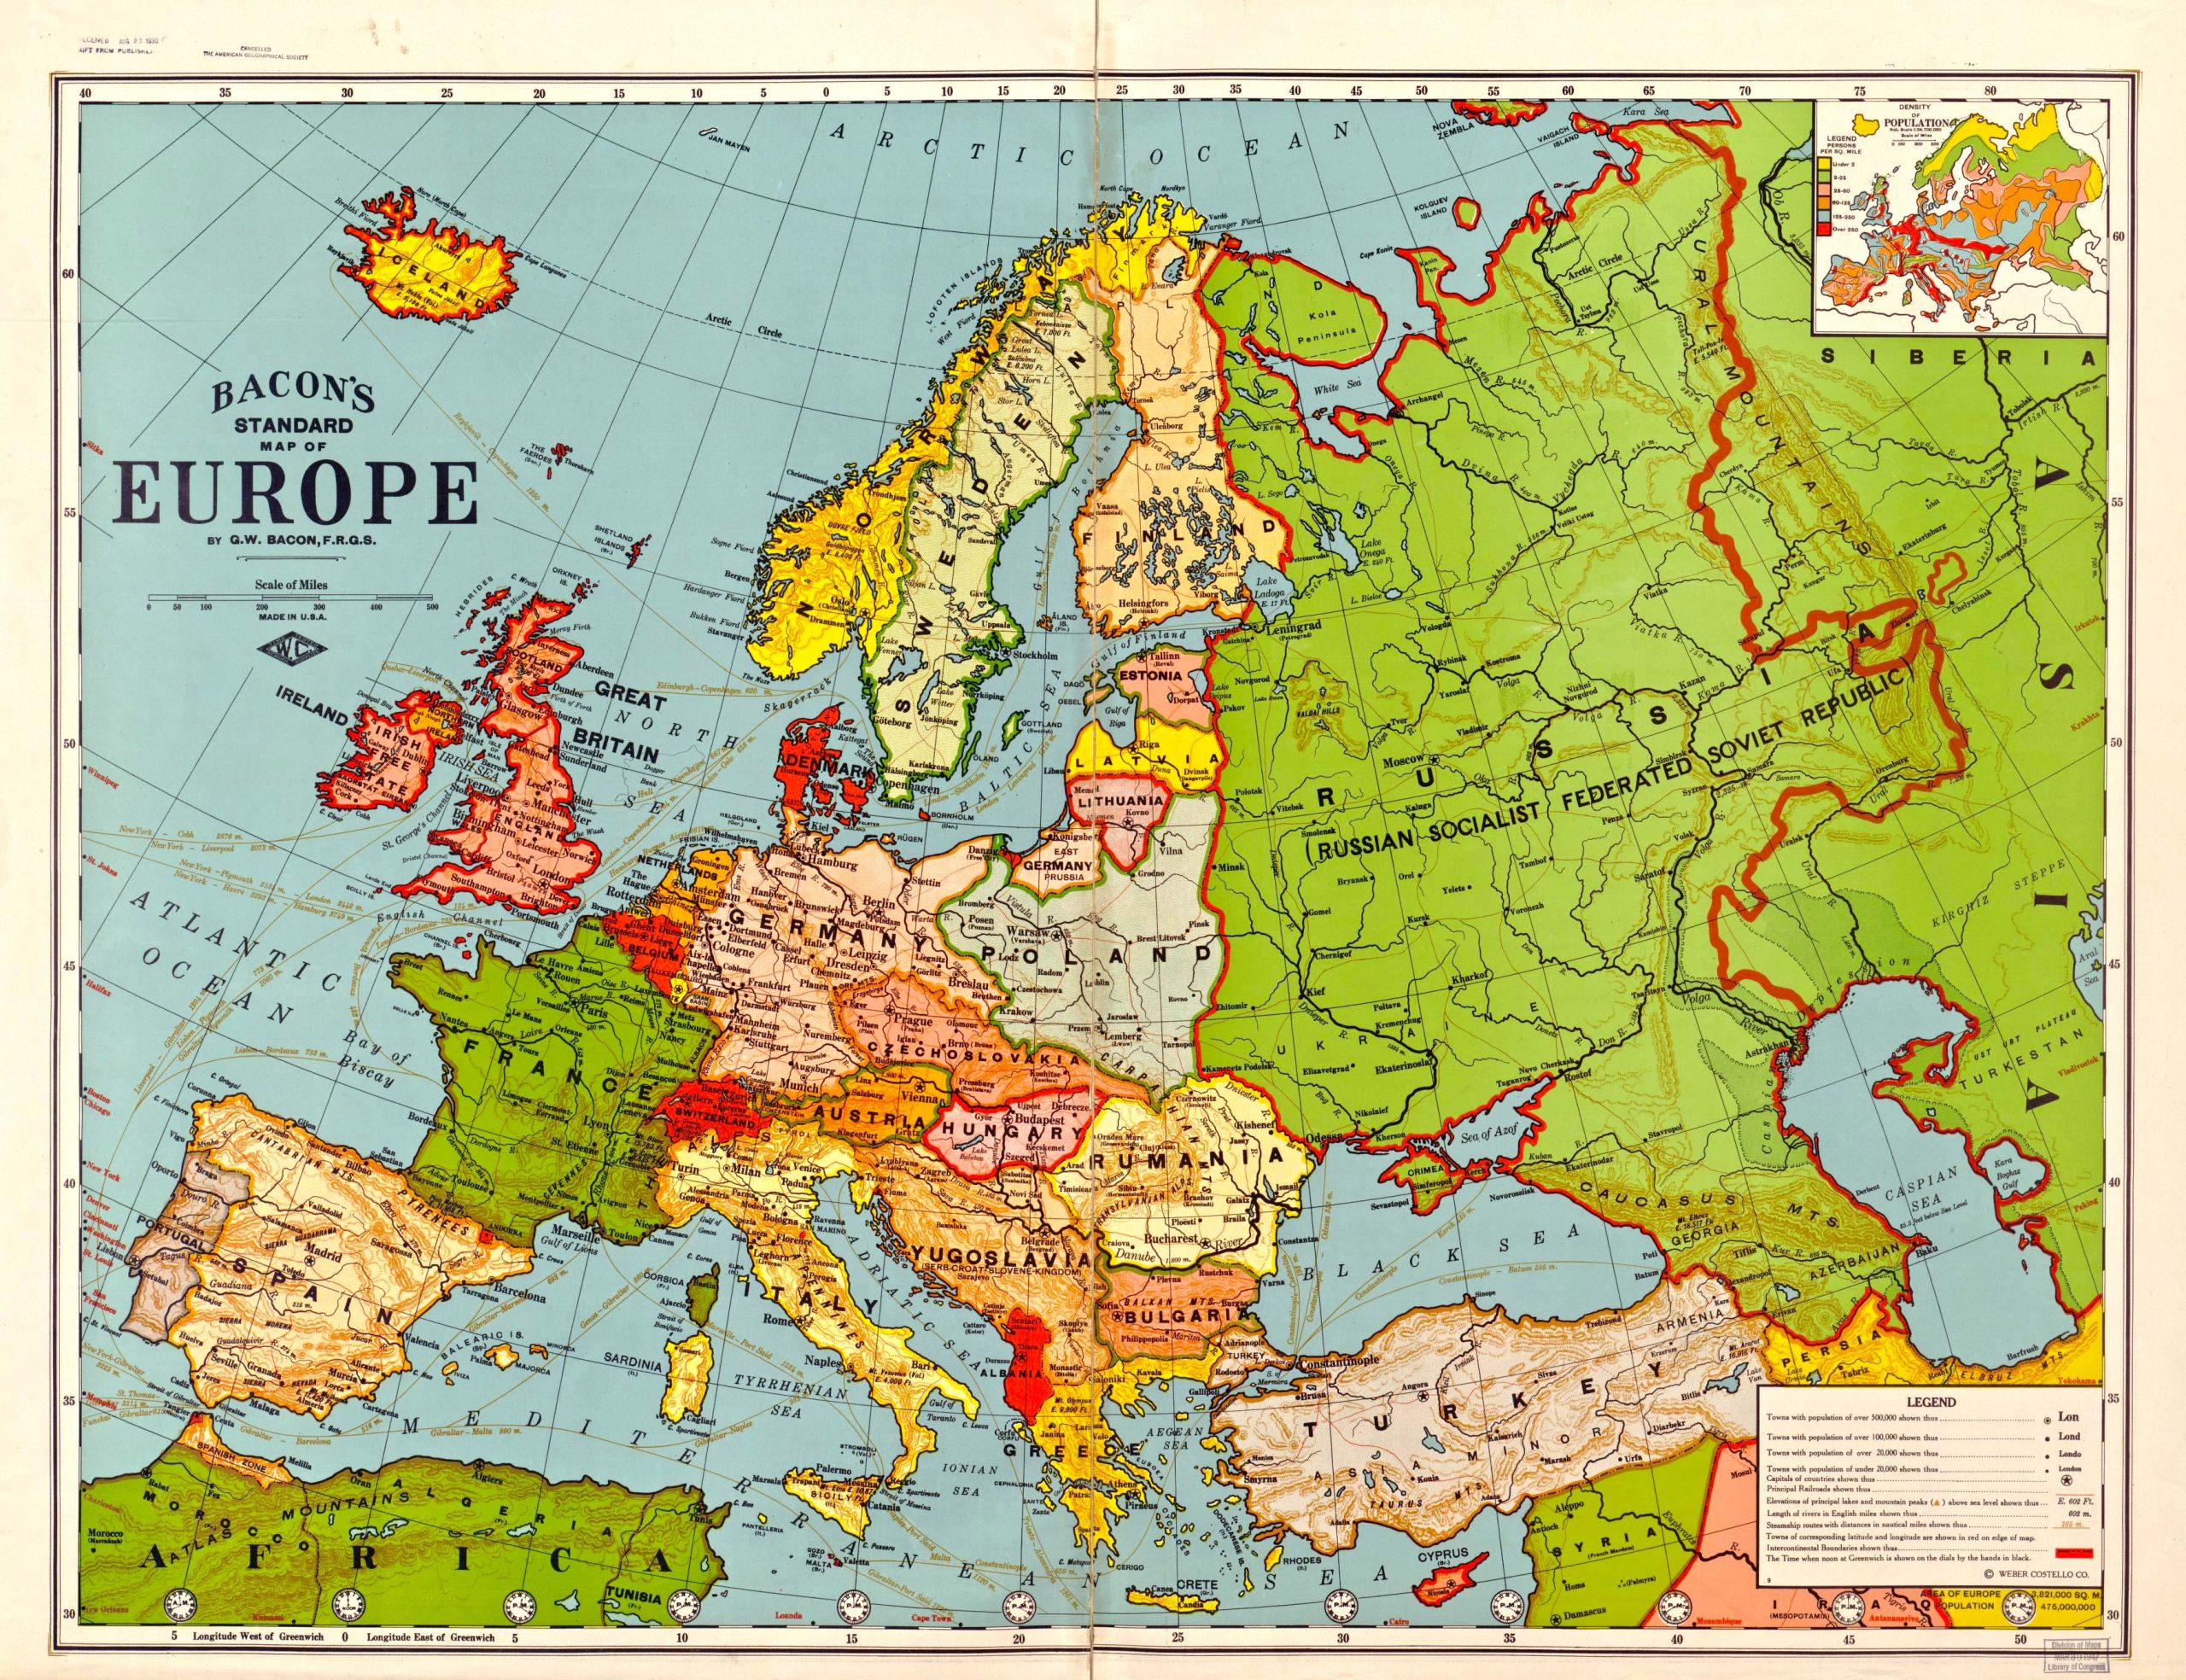 Europe Historical Map (1925)